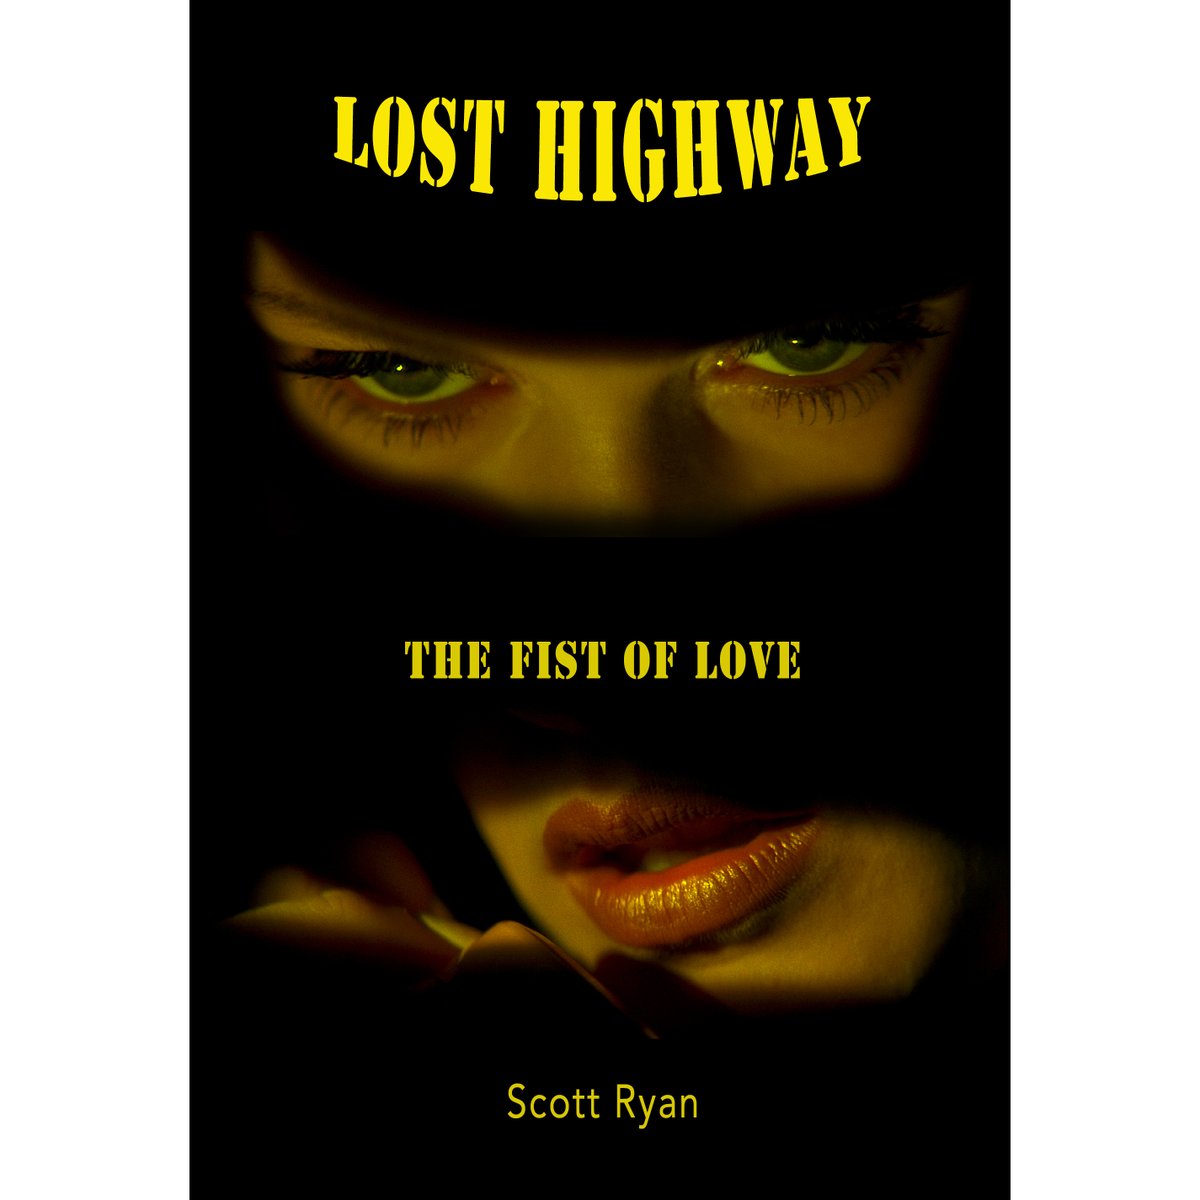 Scott Ryan's Lost Highway book will be released Spring 2023. The book is done, just waiting on the Bill Pullman interview to happen. The book is now up for Preorder. Like with FWWM, this will be a color book on the first print run. #davidlynch Preorder: tuckerdspress.com/product-page/l…